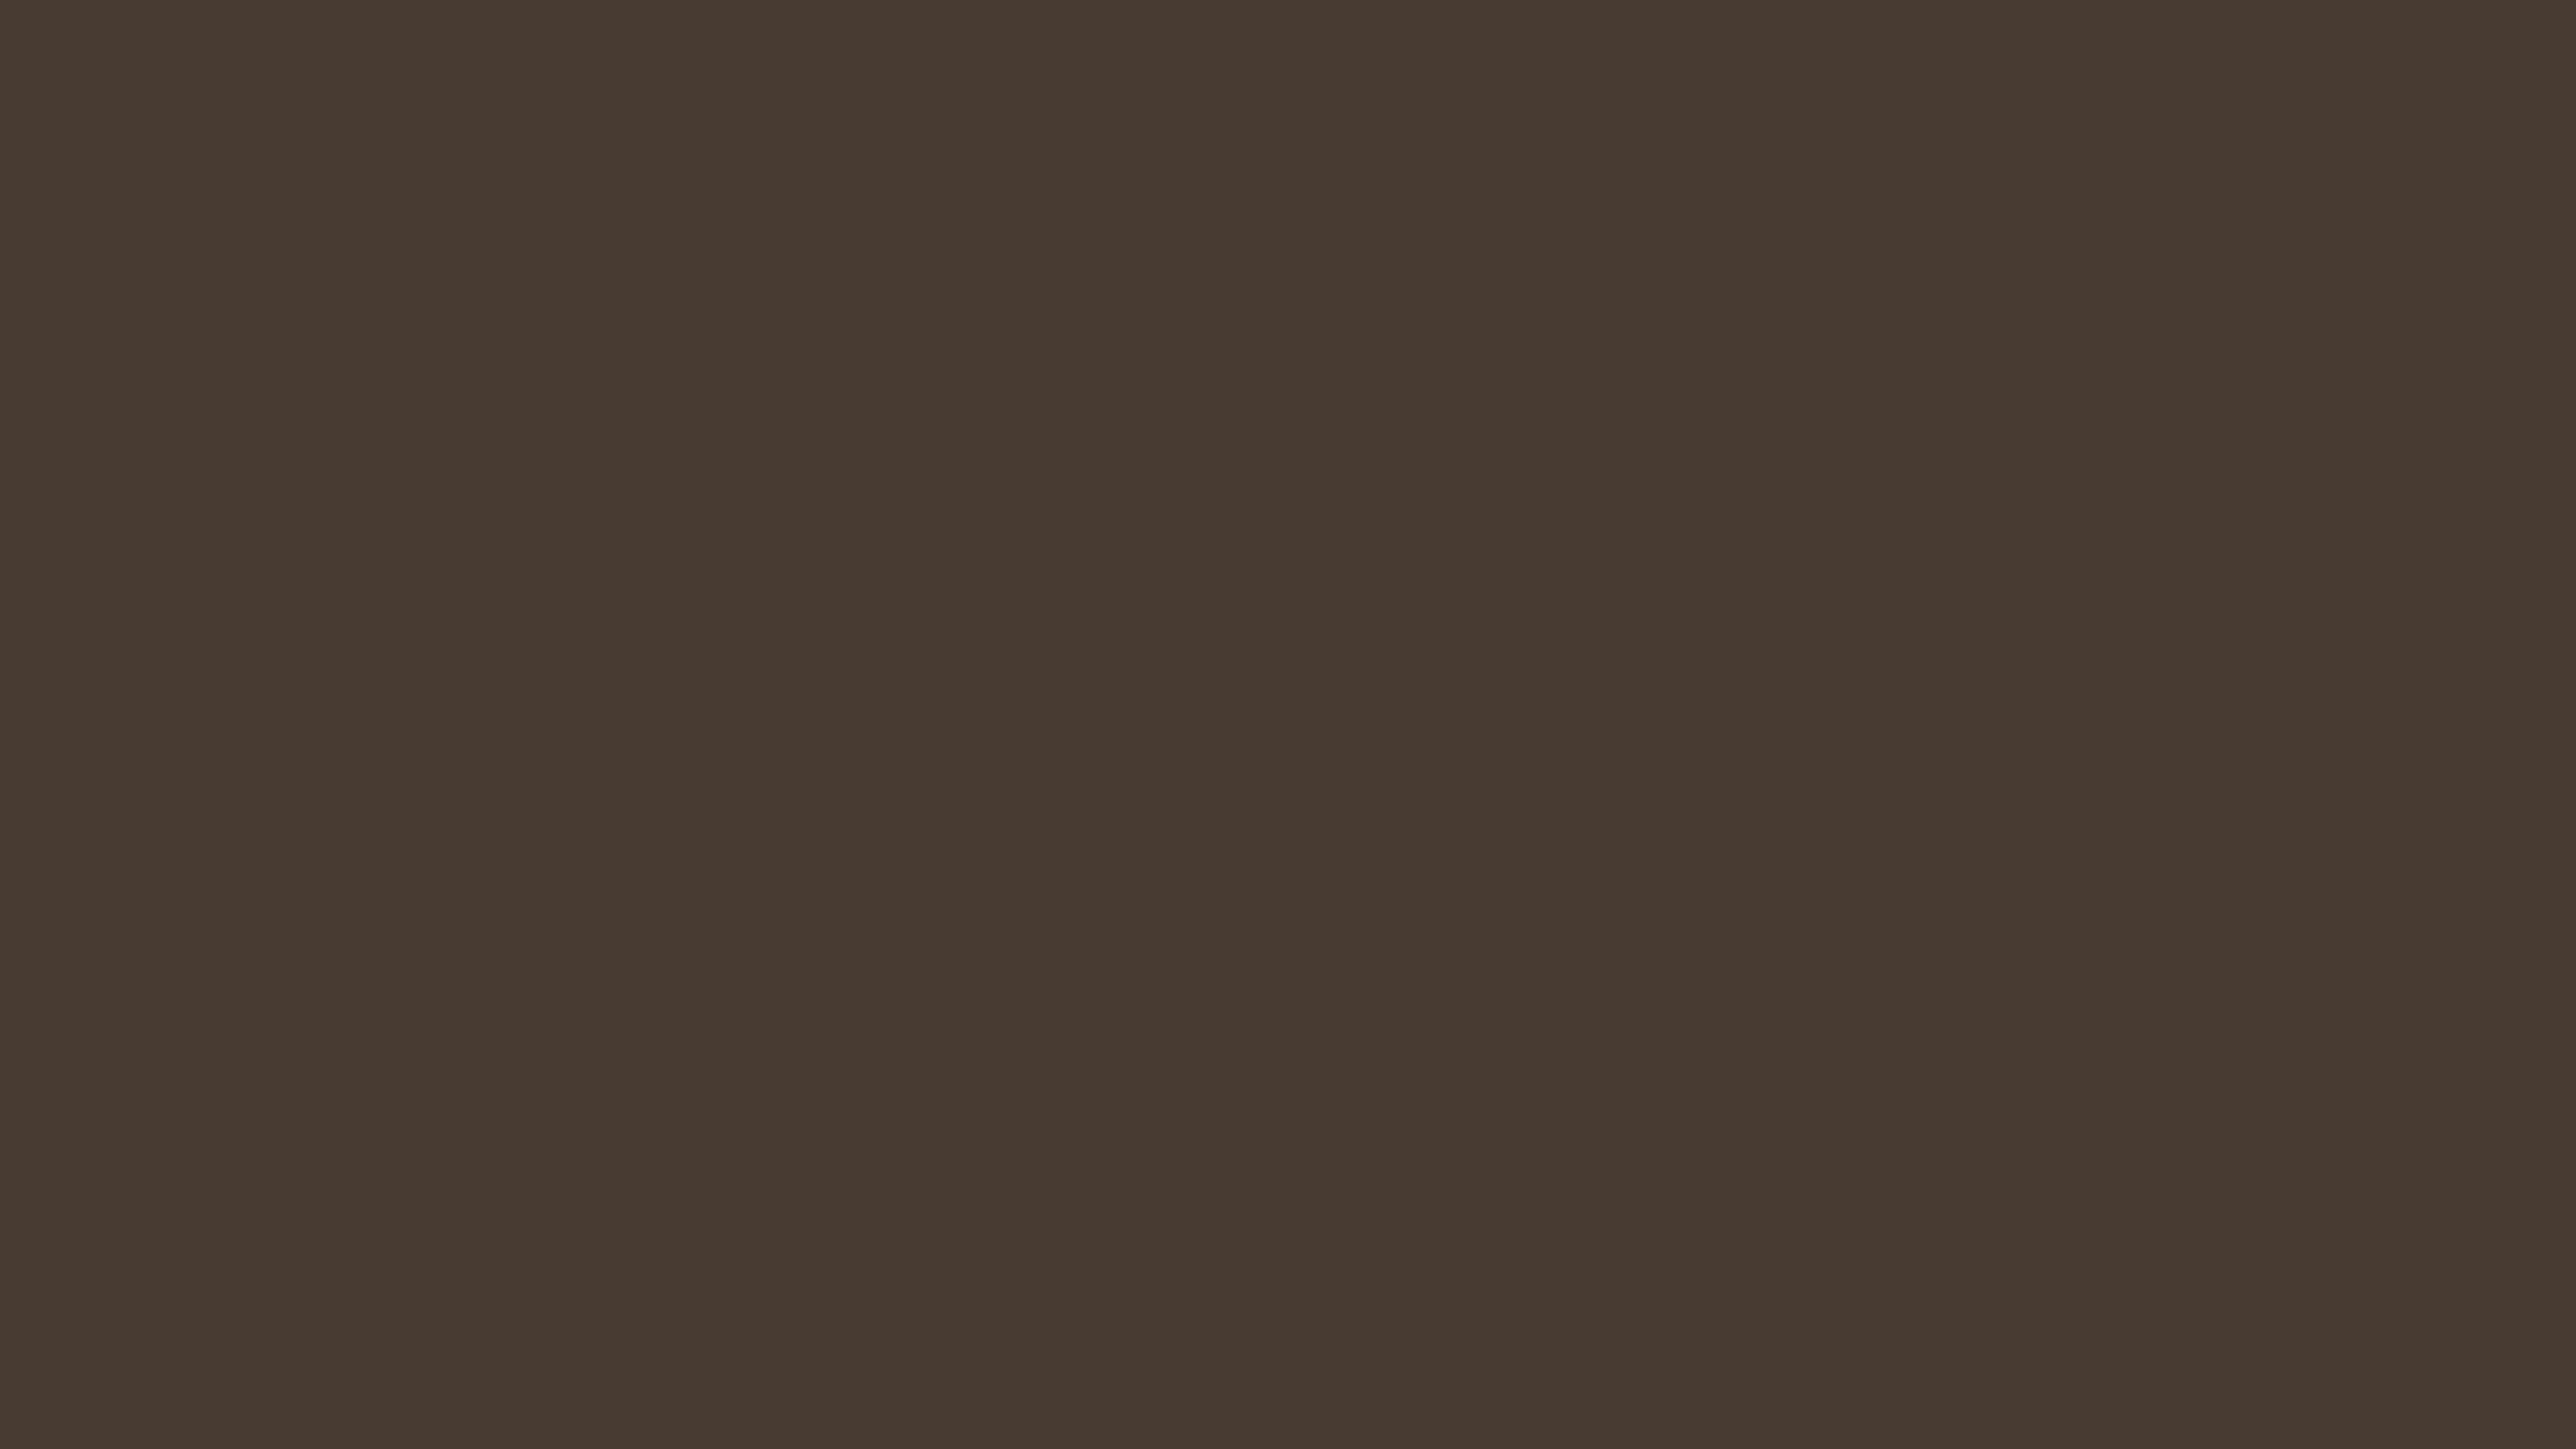 7680x4320 Dark Taupe Solid Color Background